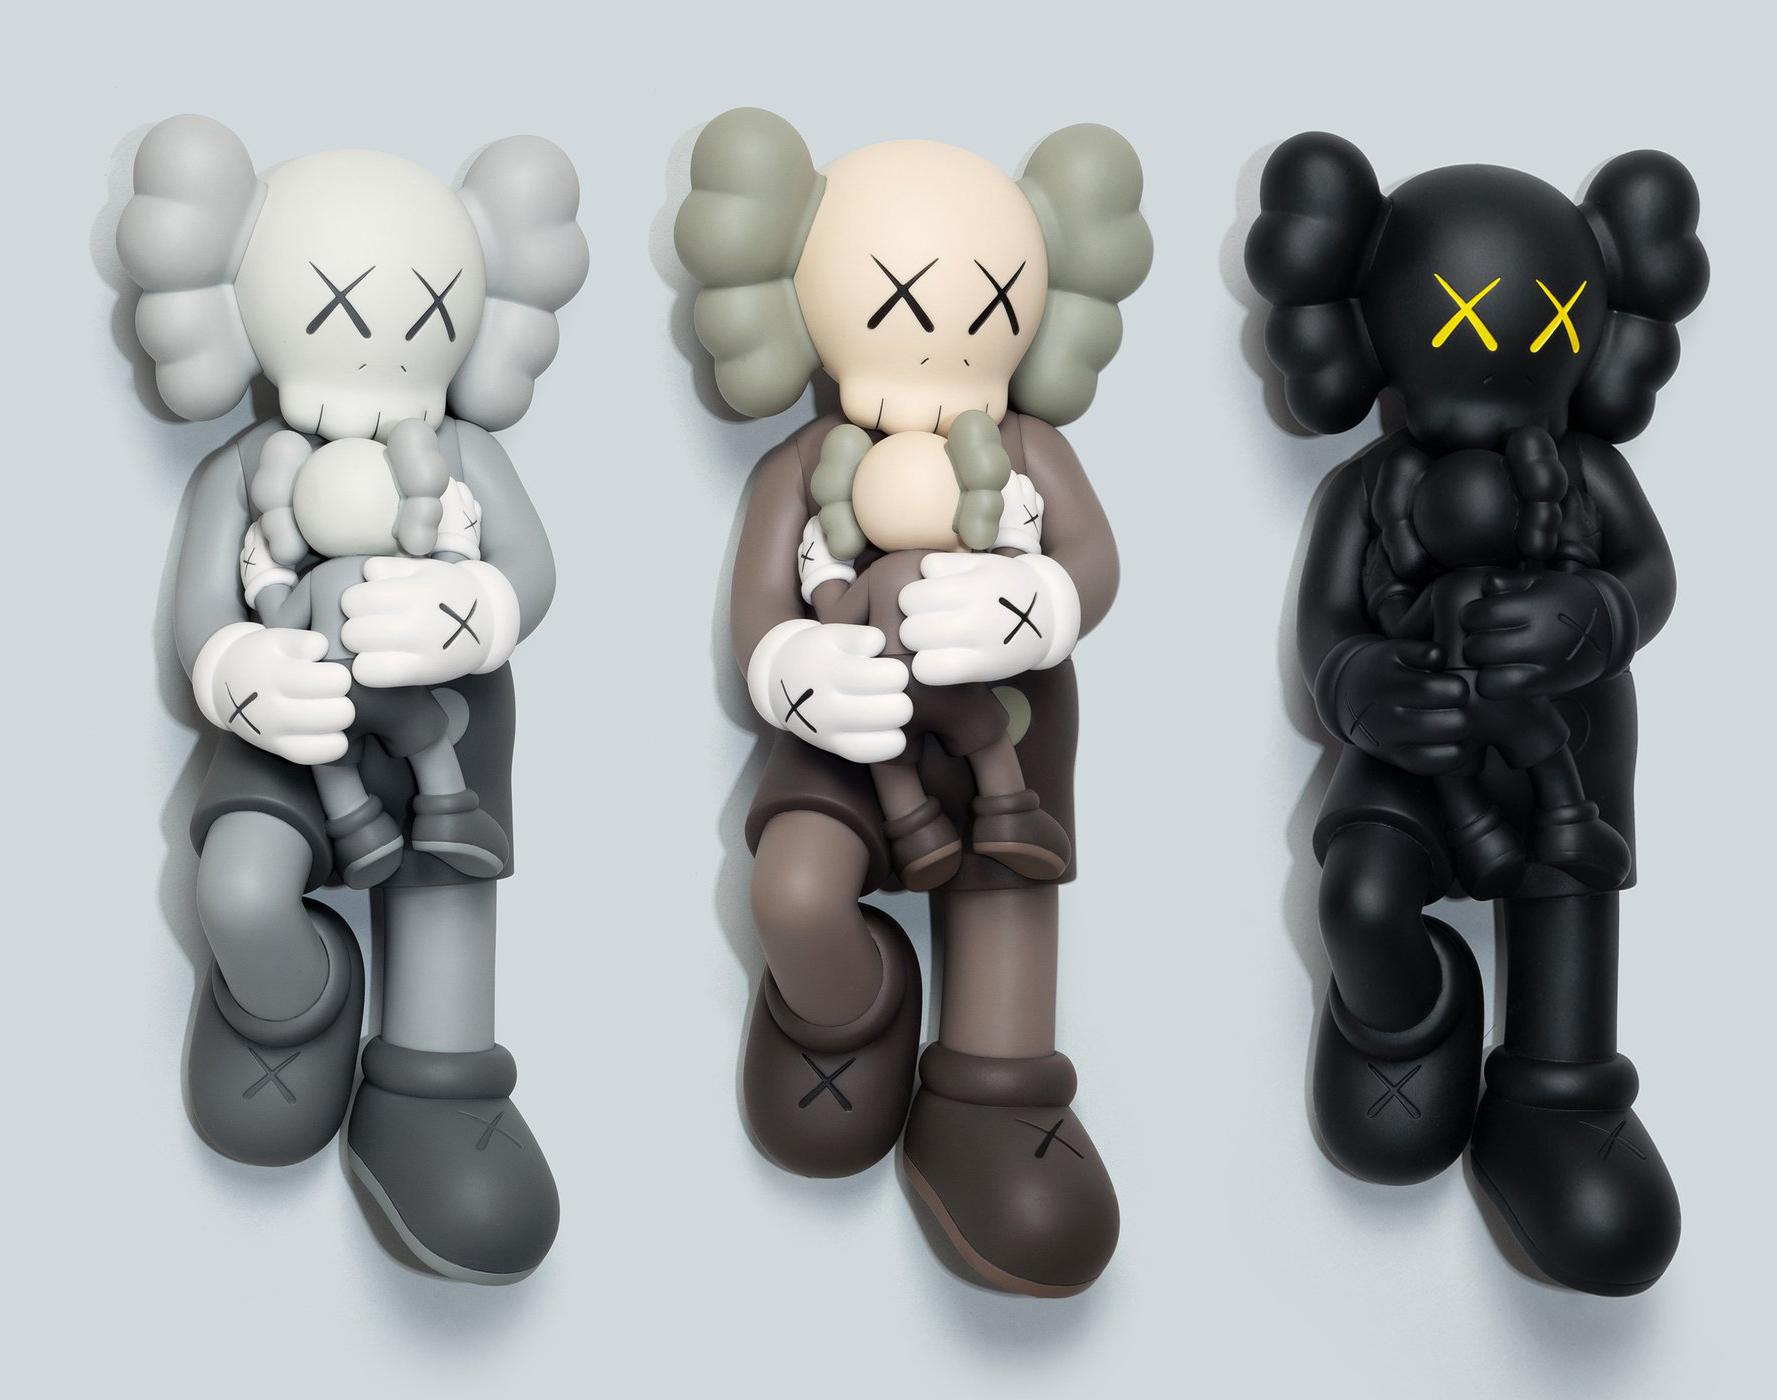 KAWS Holiday Singapore (KAWS Singapore): complete set of 3 works:

A compete set of 3 KAWS Holiday Companions new in their original packaging. KAWS Singapore was published in 2021 to commemorate the debut of KAWS’ 42-meter inflatable work of same